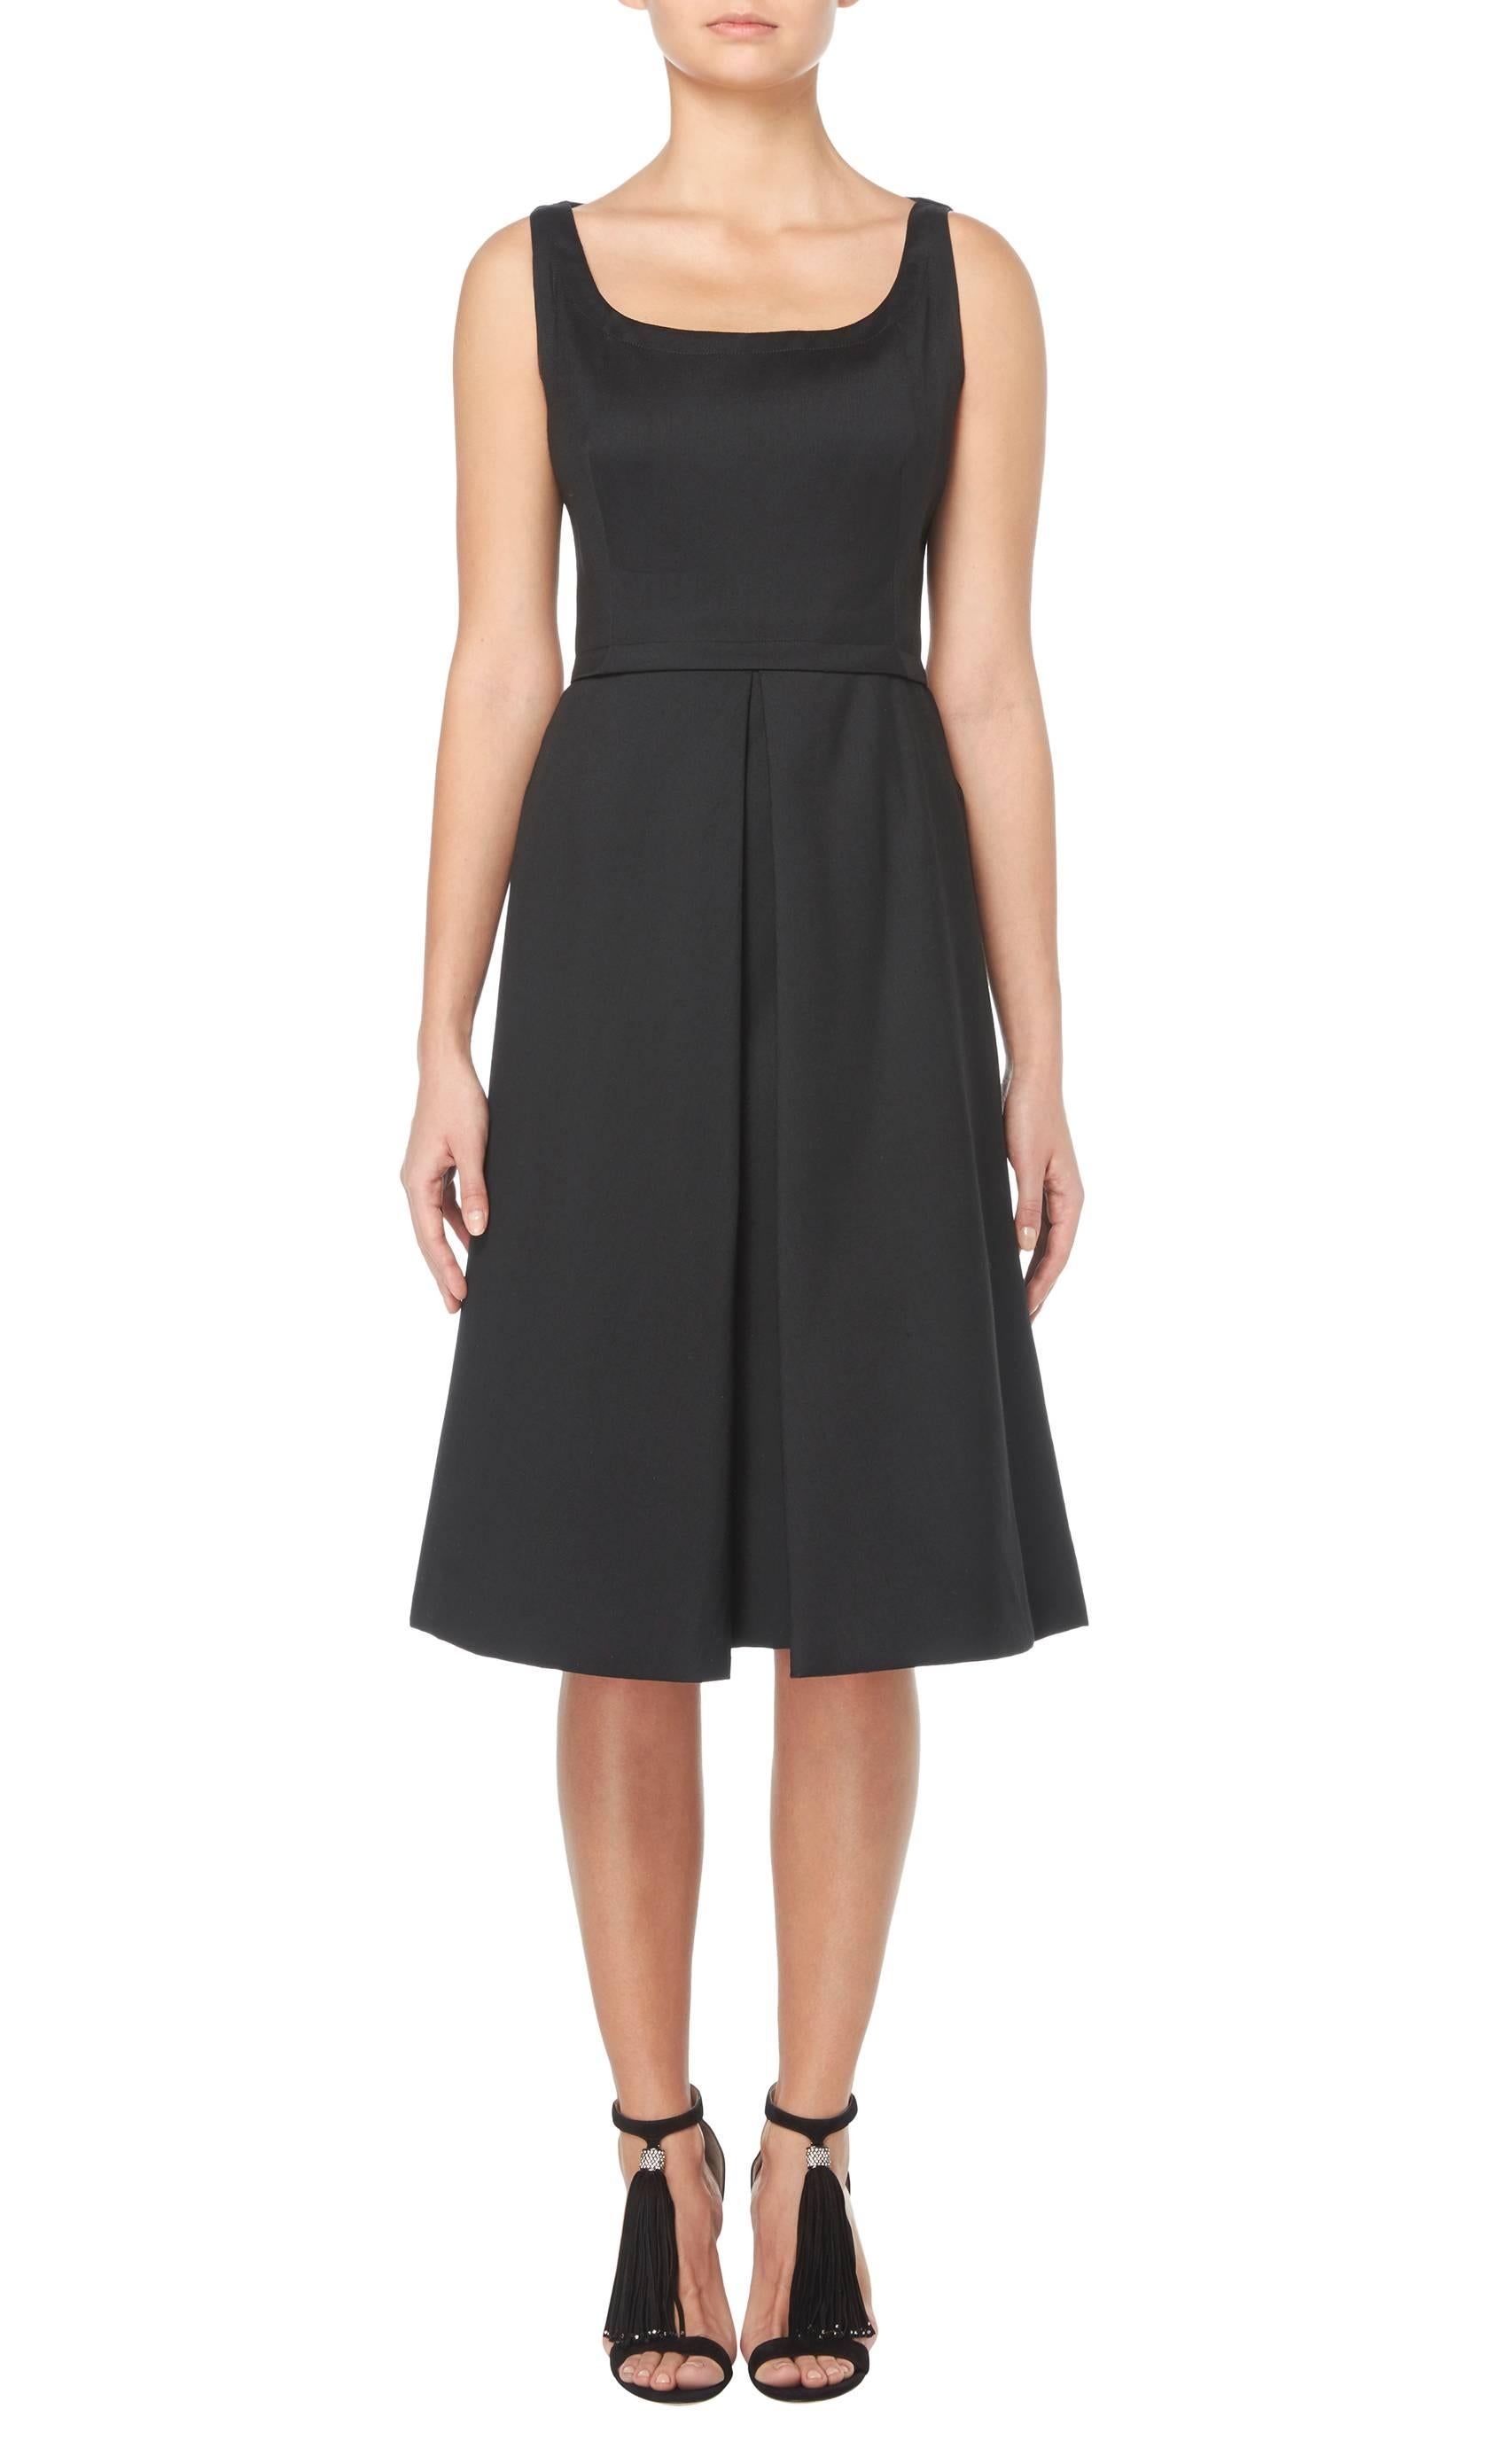 This classic little black dress by Nina Ricci is a great wardrobe staple. With a flattering scooped neckline, the dress is fitted on the bust and a waistband draws the eye to the small of the waist. The skirt flares out into an A-line silhouette and